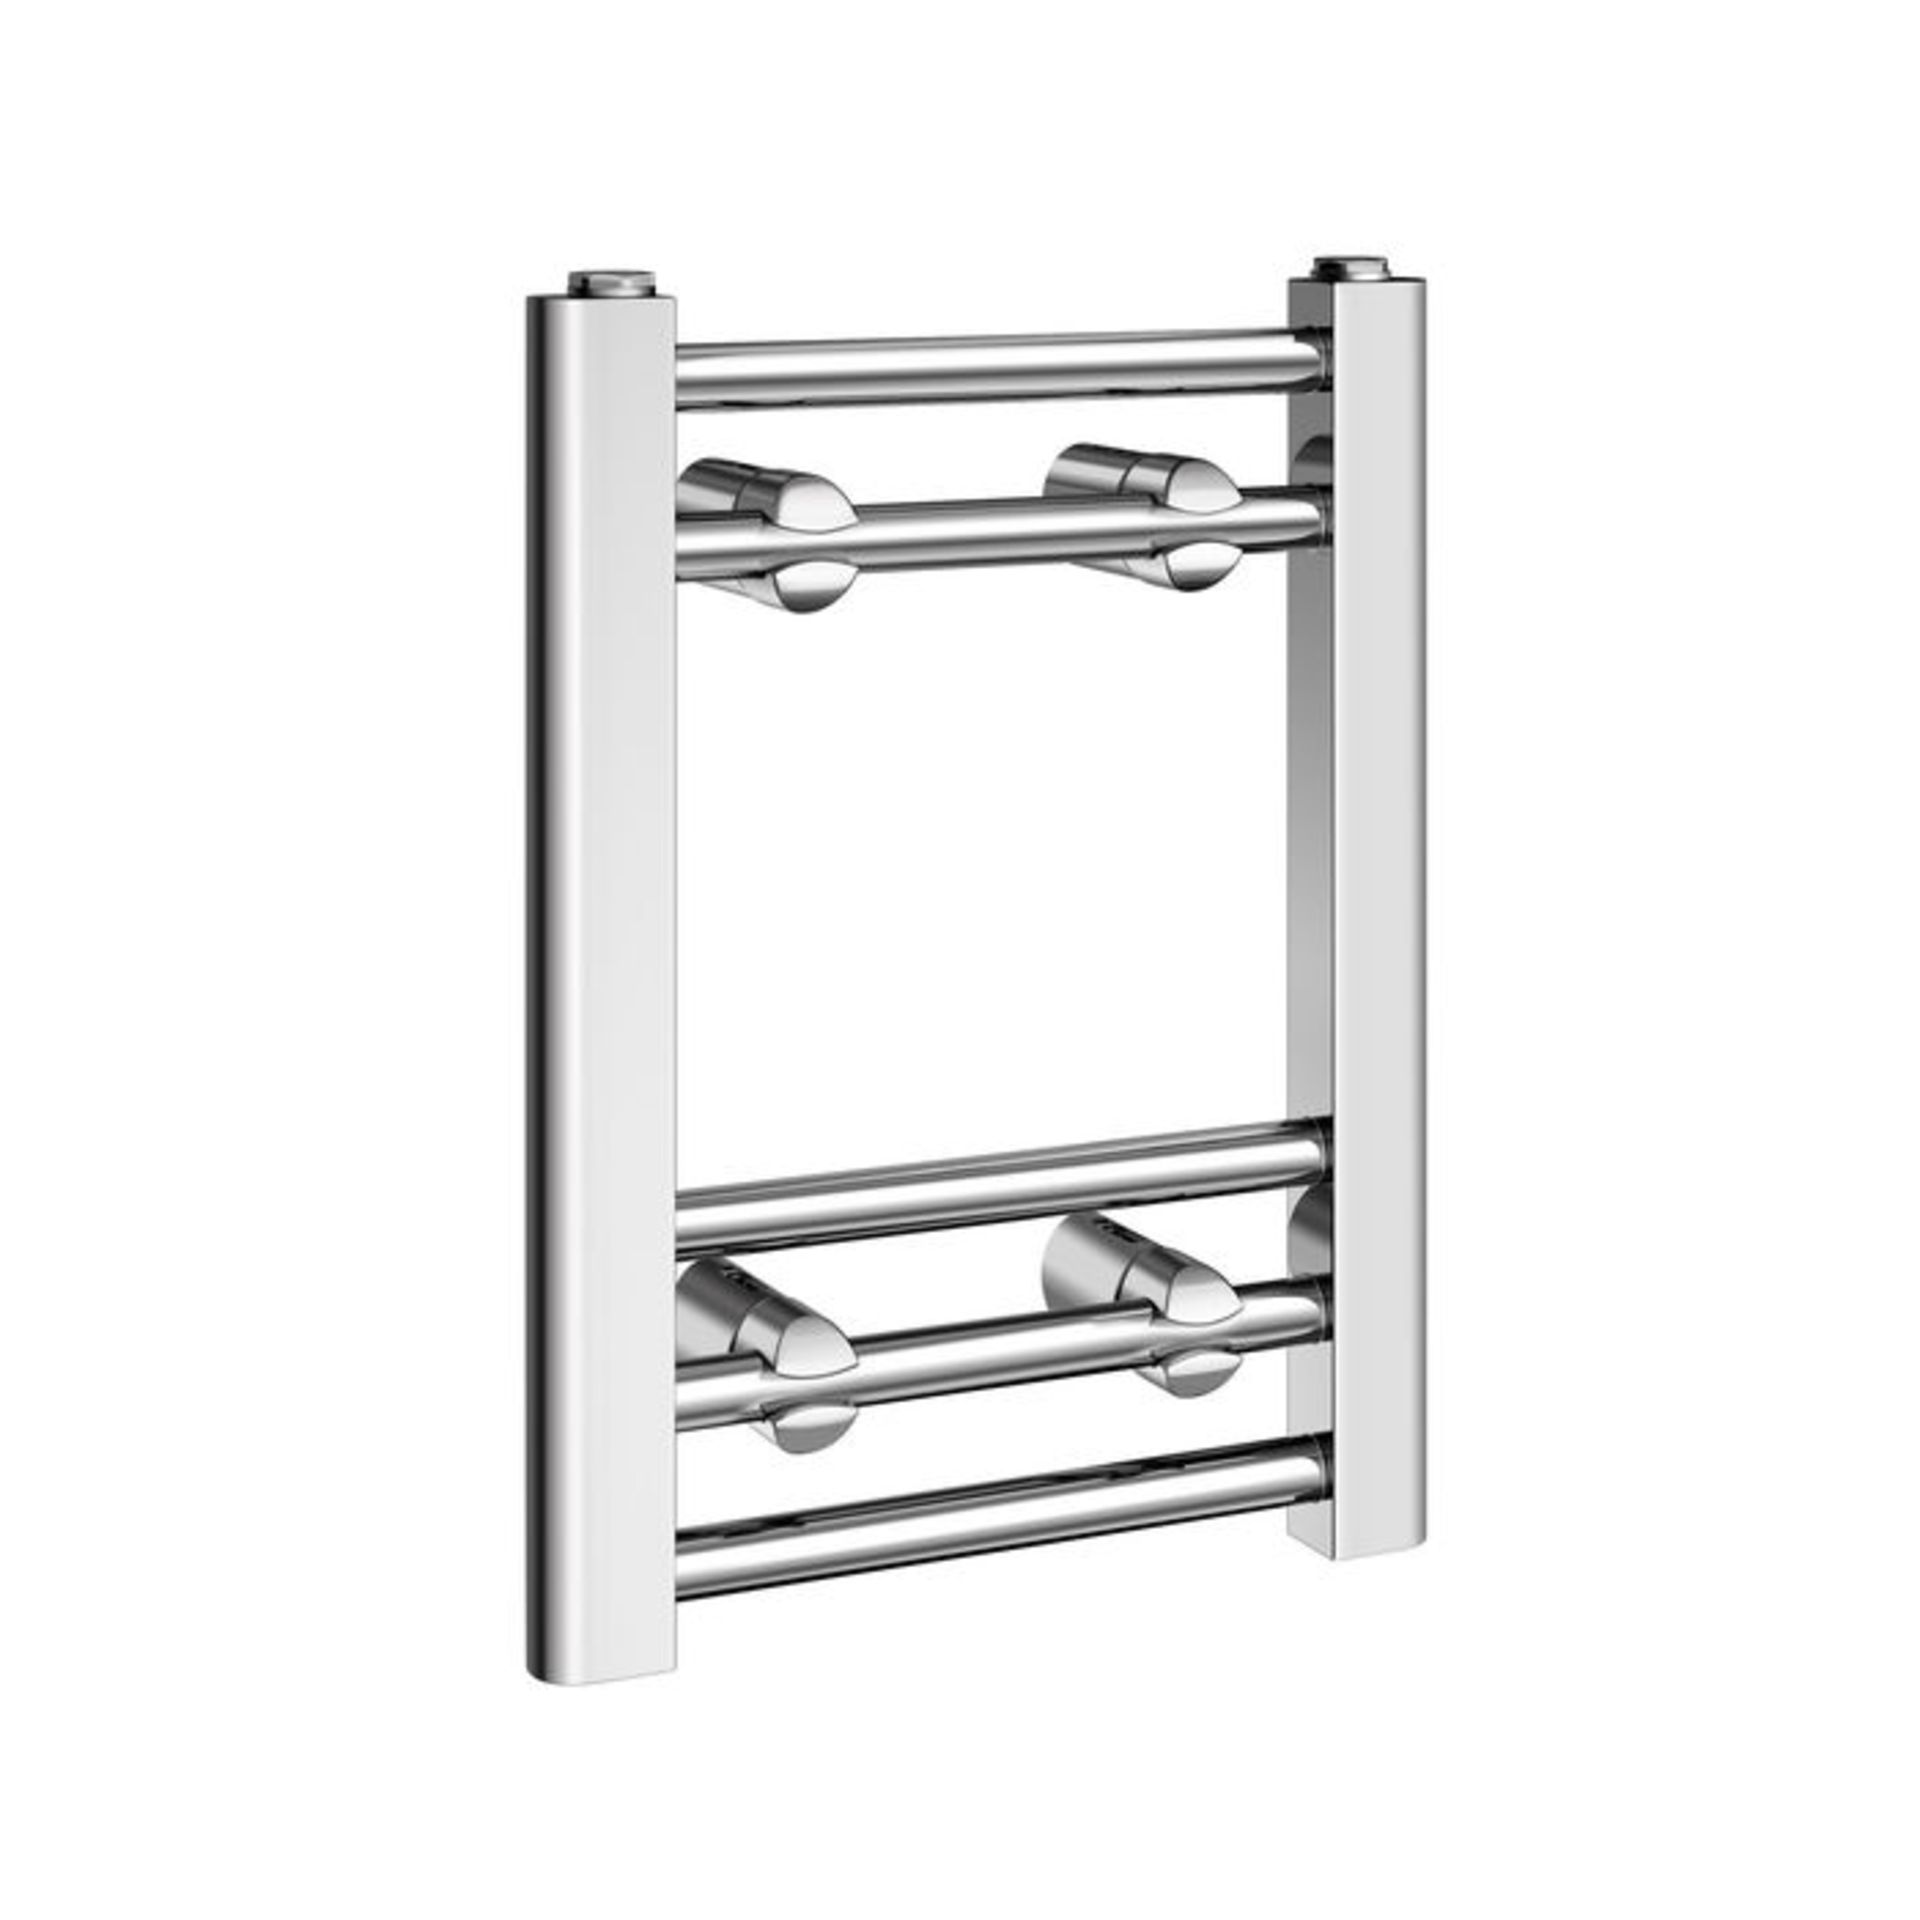 (XM104) 400x300mm - 20mm Tubes - Chrome Heated Straight Rail Ladder Towel Rail. . Low carbon steel - Image 3 of 3